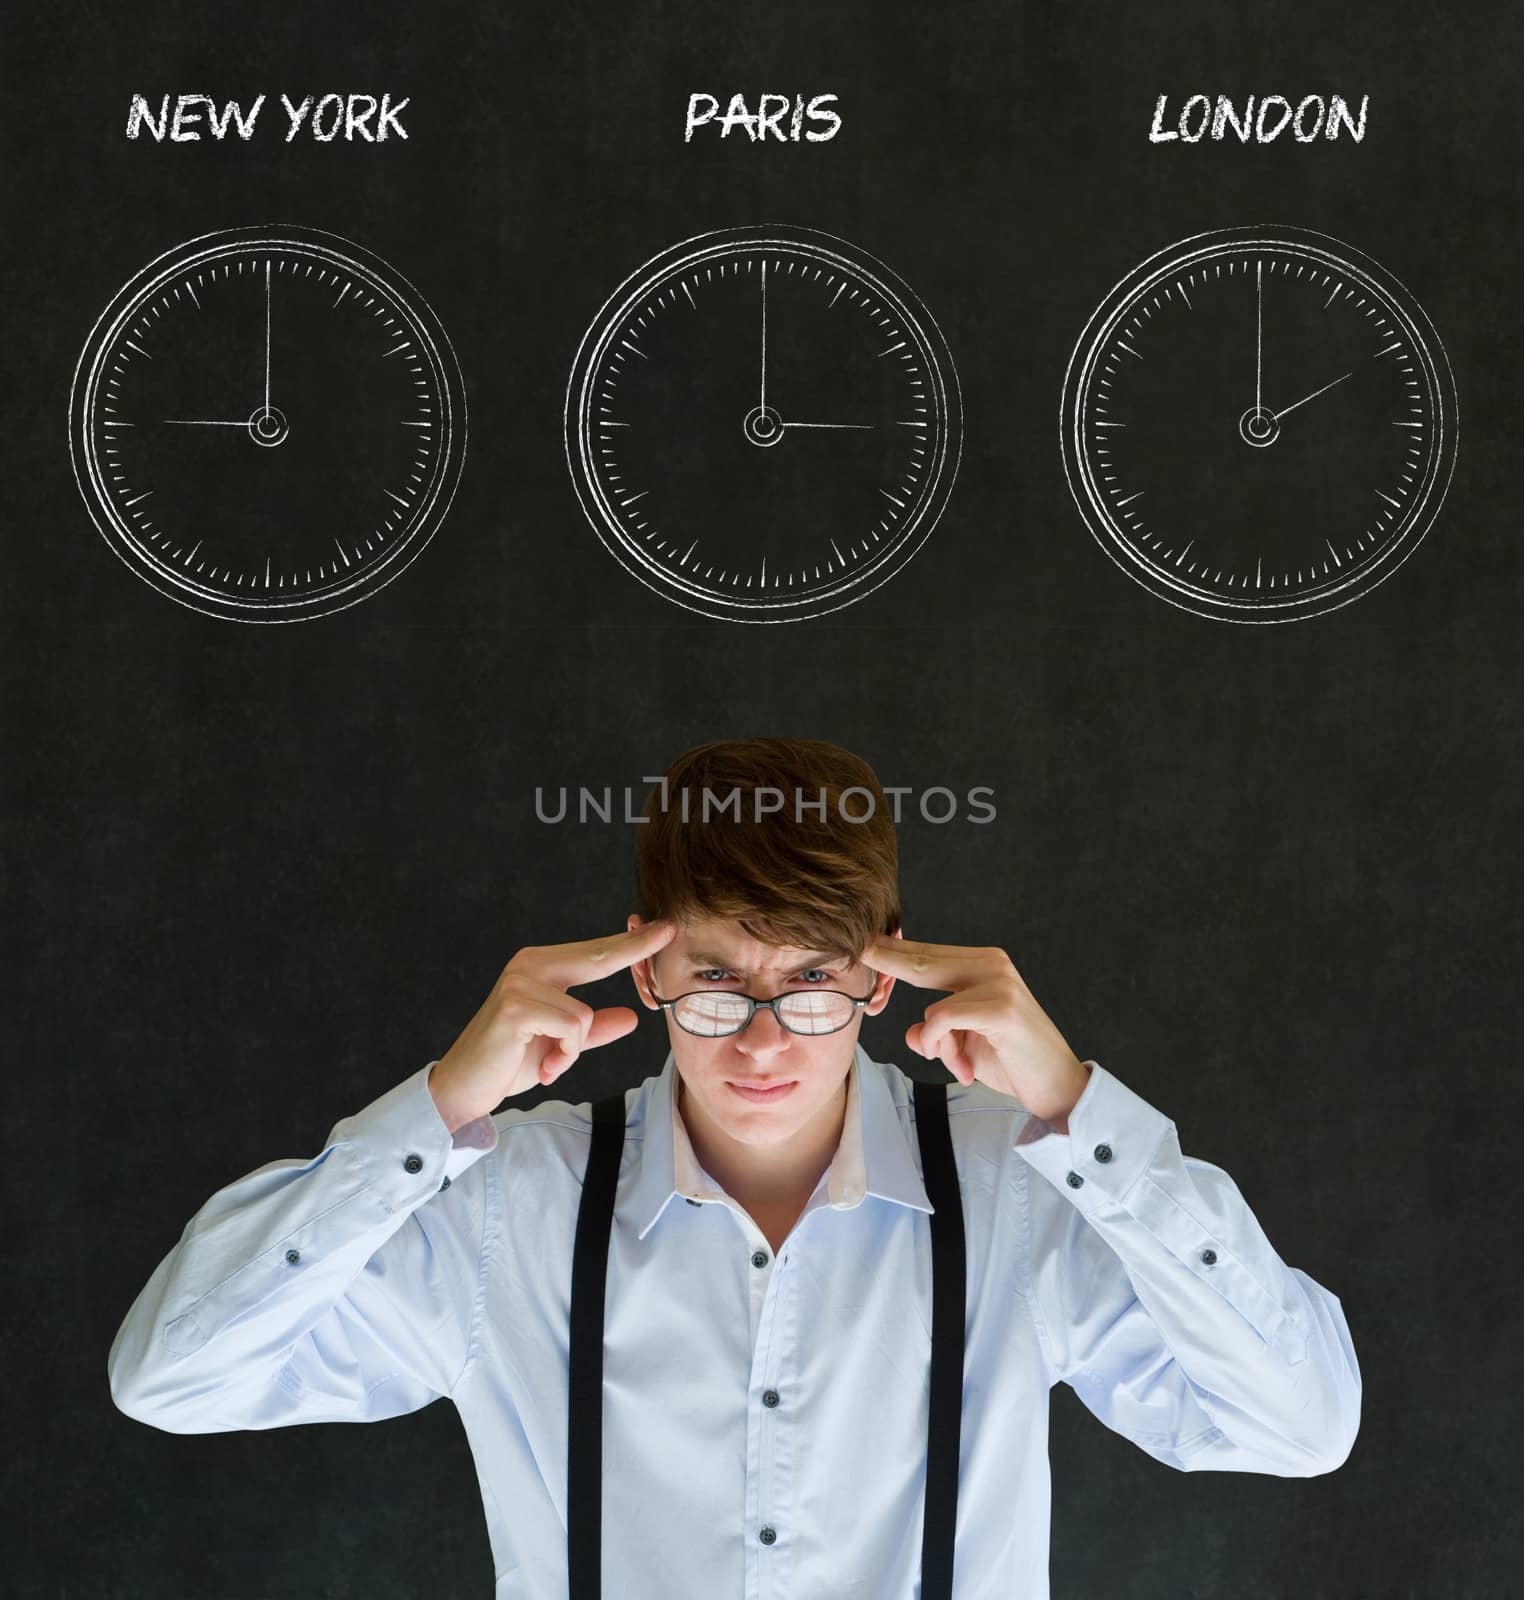 Businessman thinking with New York, Paris and London chalk time zone clocks on blackboard background